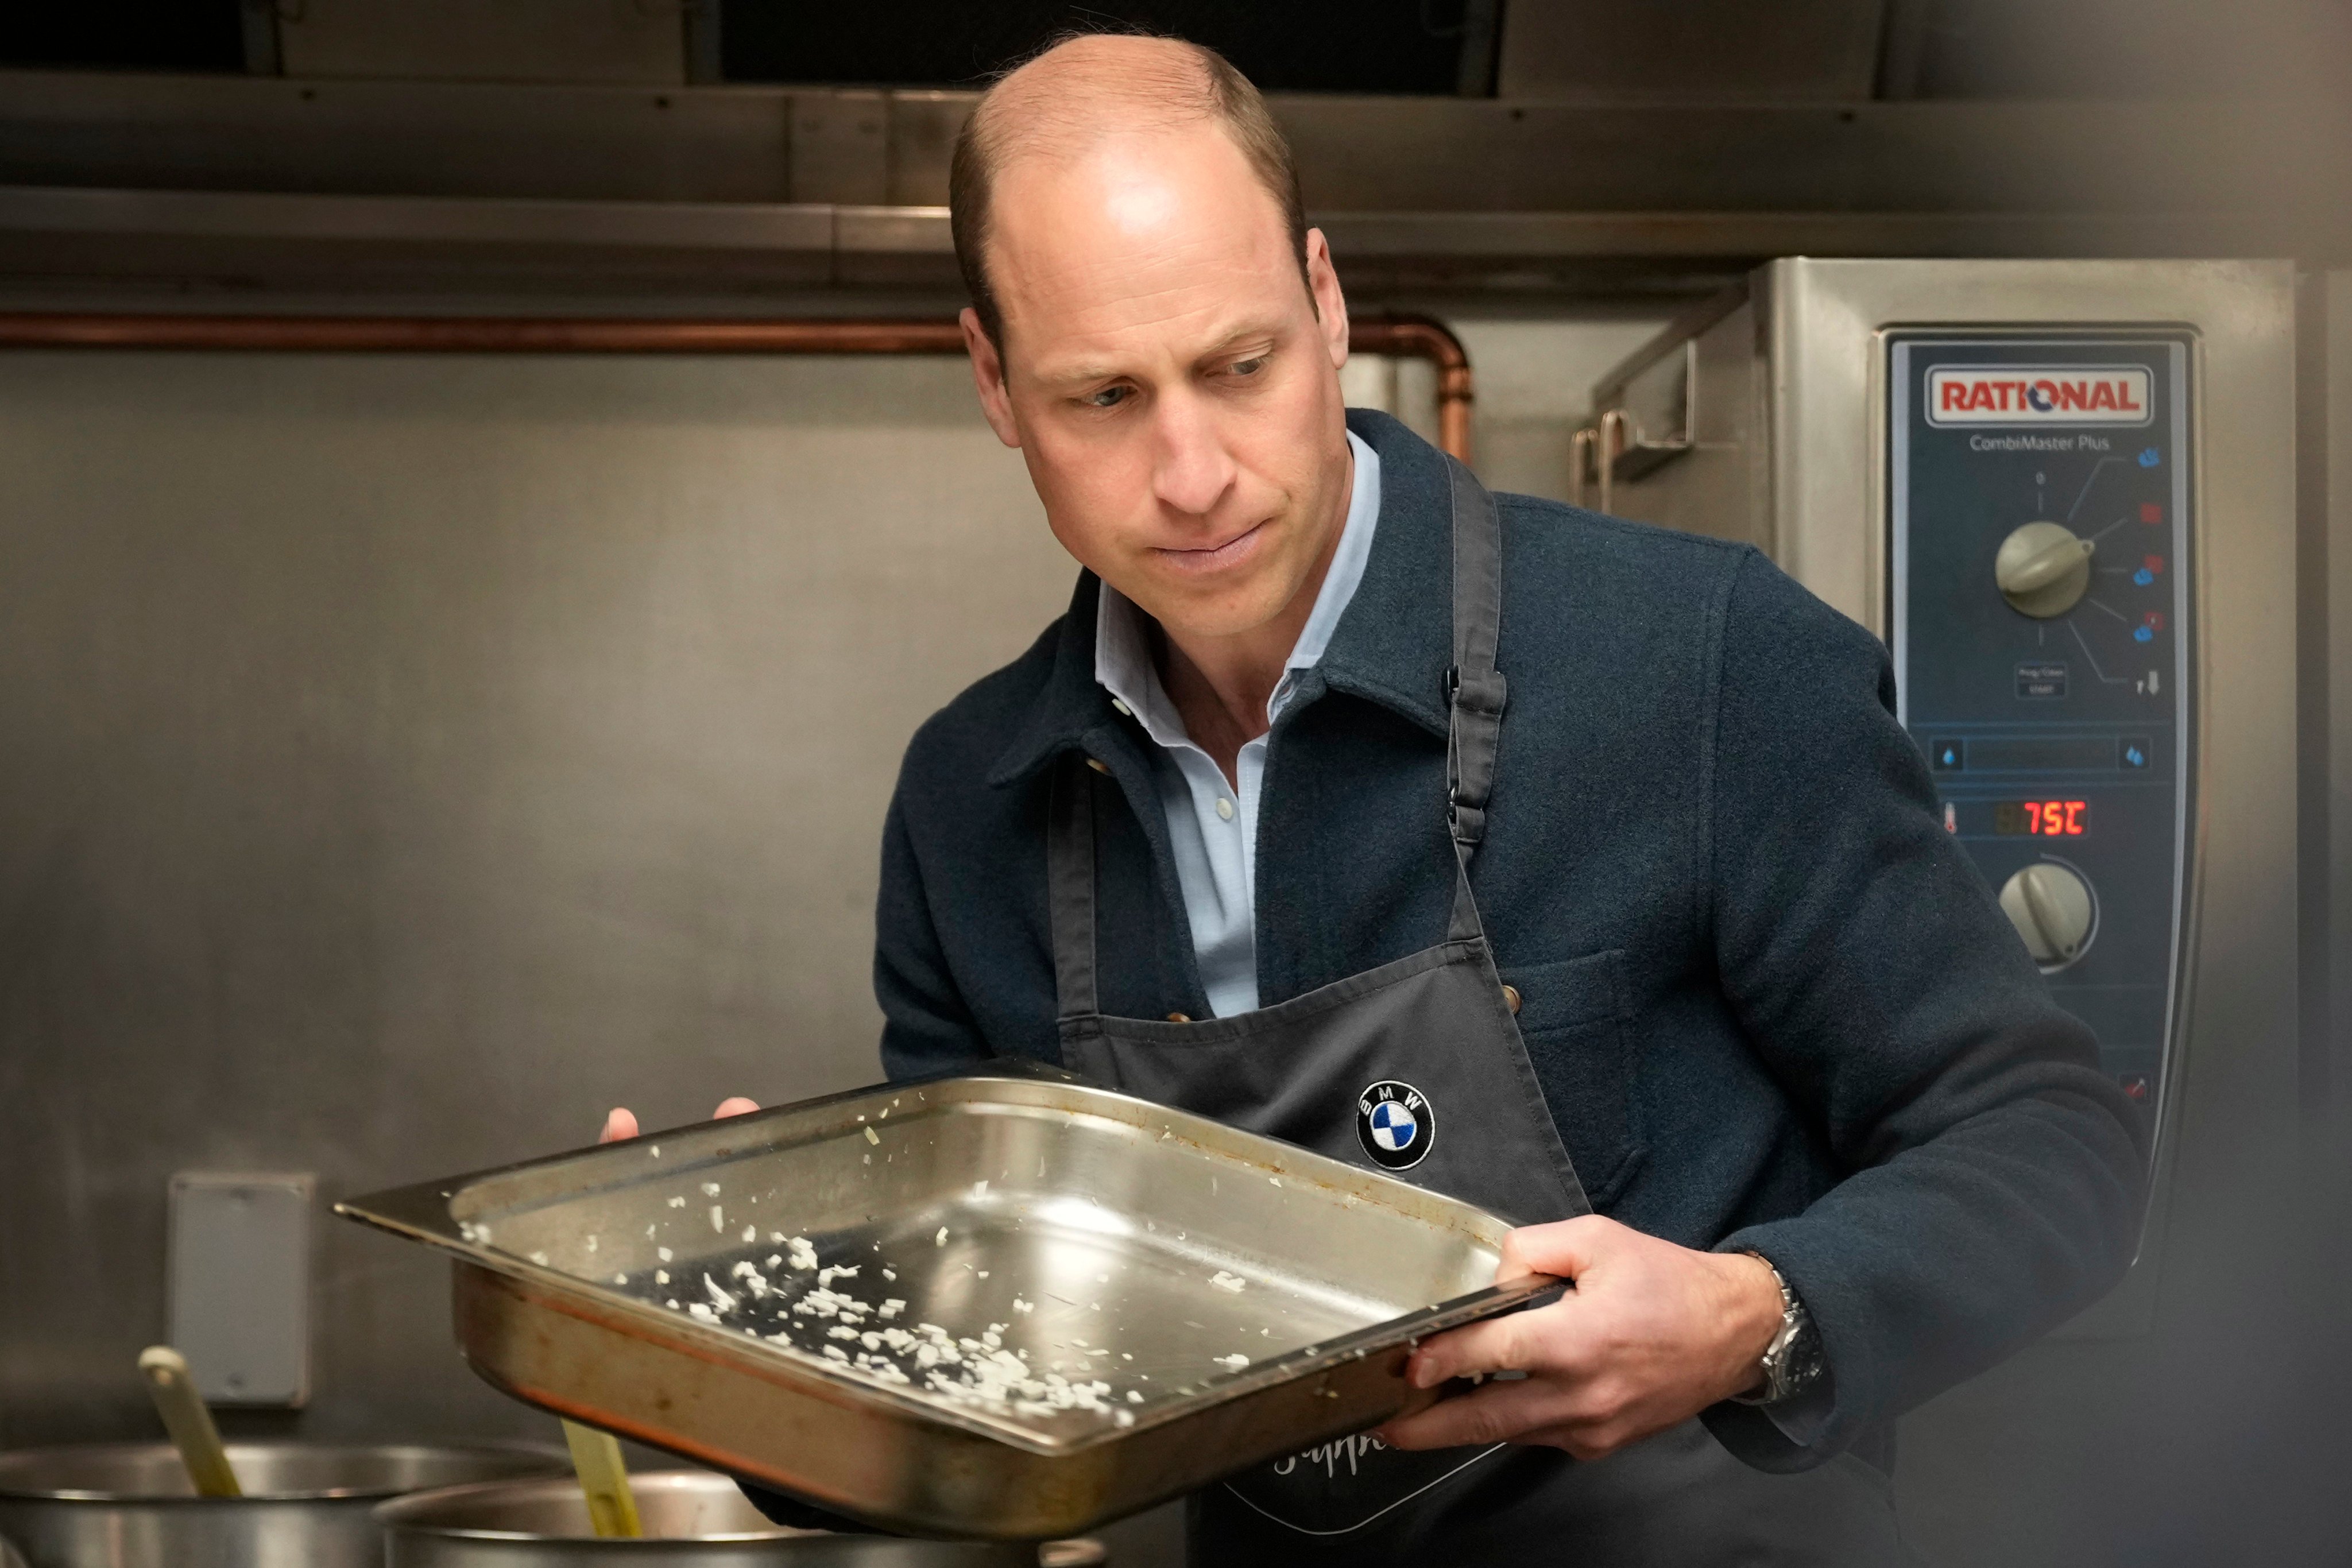 The Prince visited a surplus food redistribution charity, to learn about its work bridging the gap between food waste and food poverty across Surrey and West London. Photo: AP/Pool